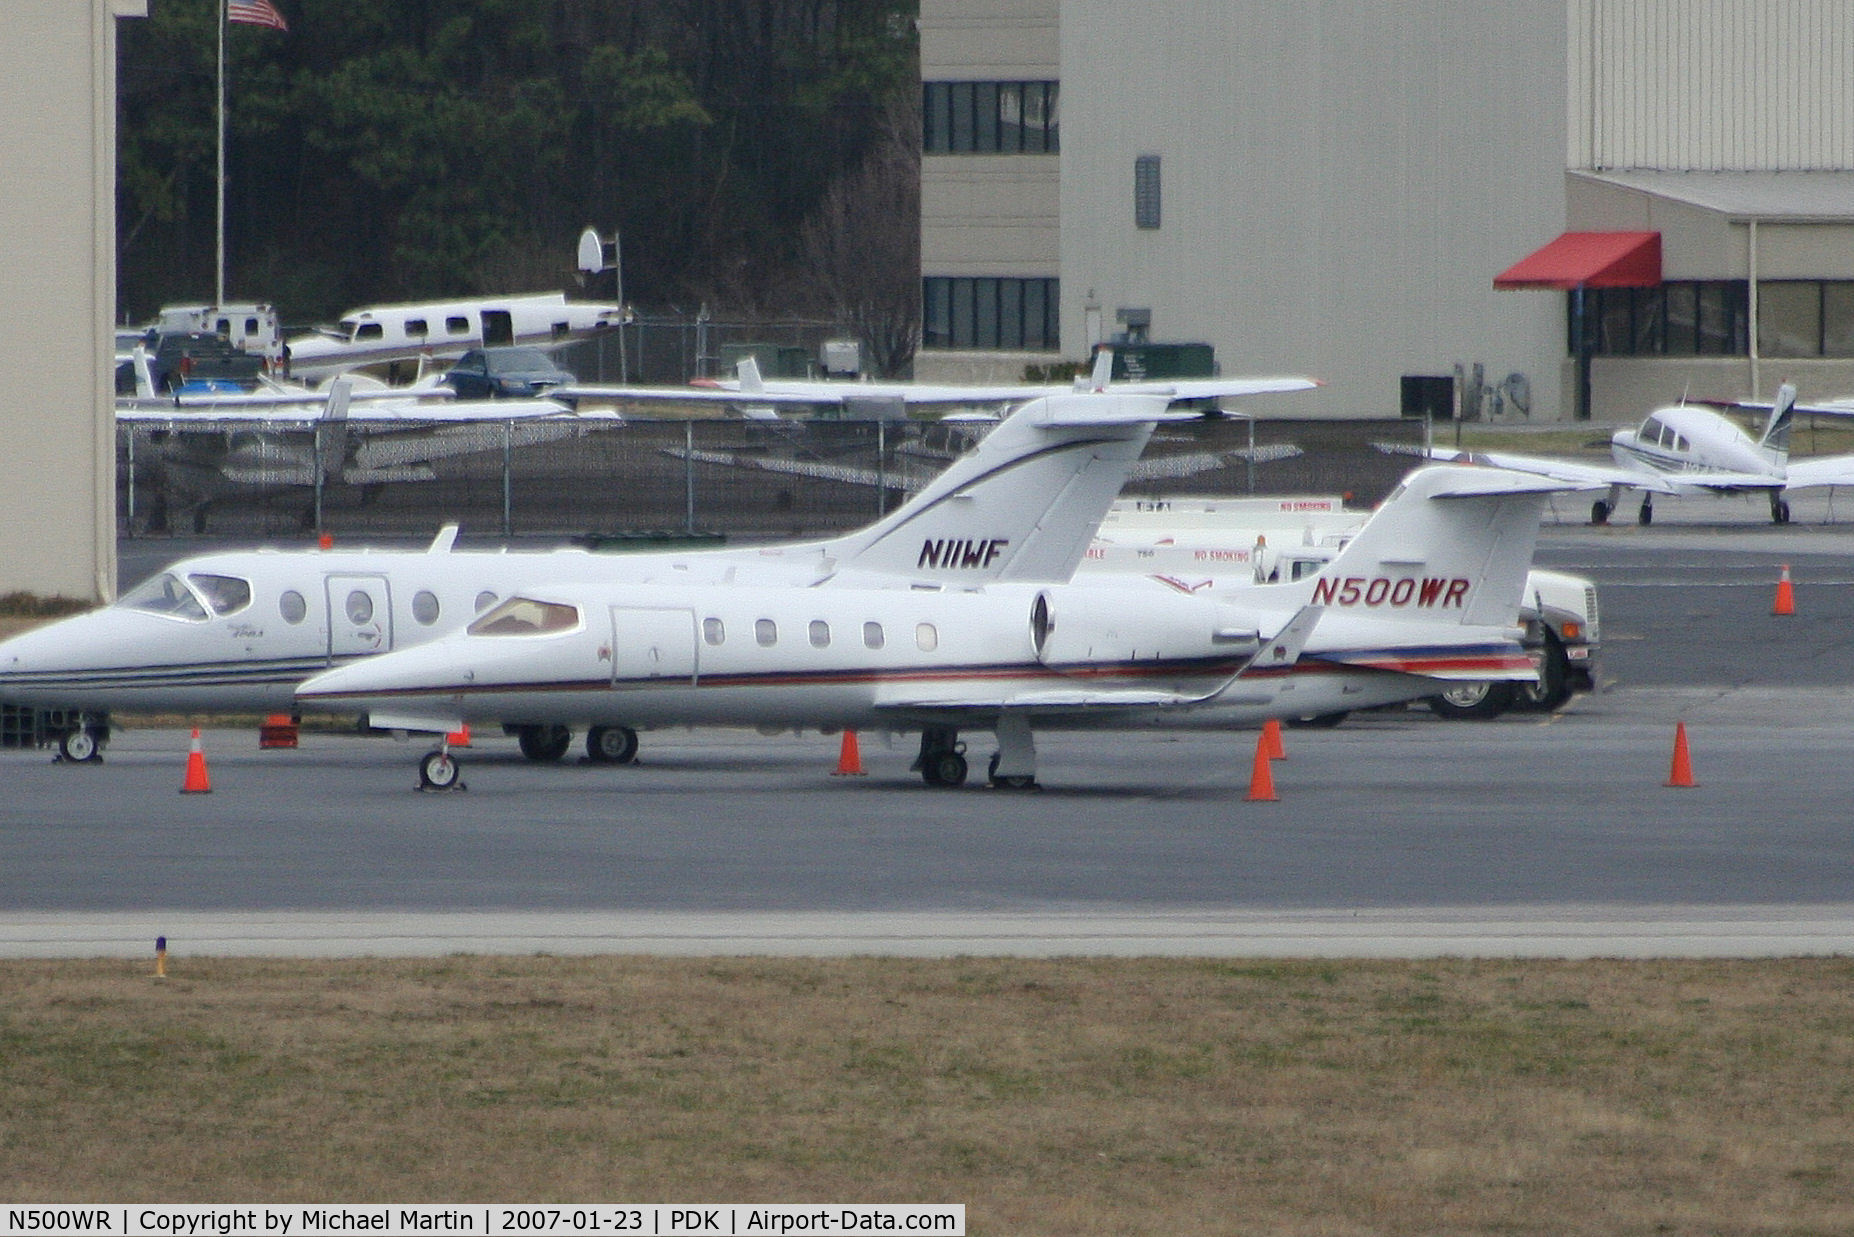 N500WR, 1991 Learjet 31A C/N 038, Rusty Wallace at Signature Flight Services